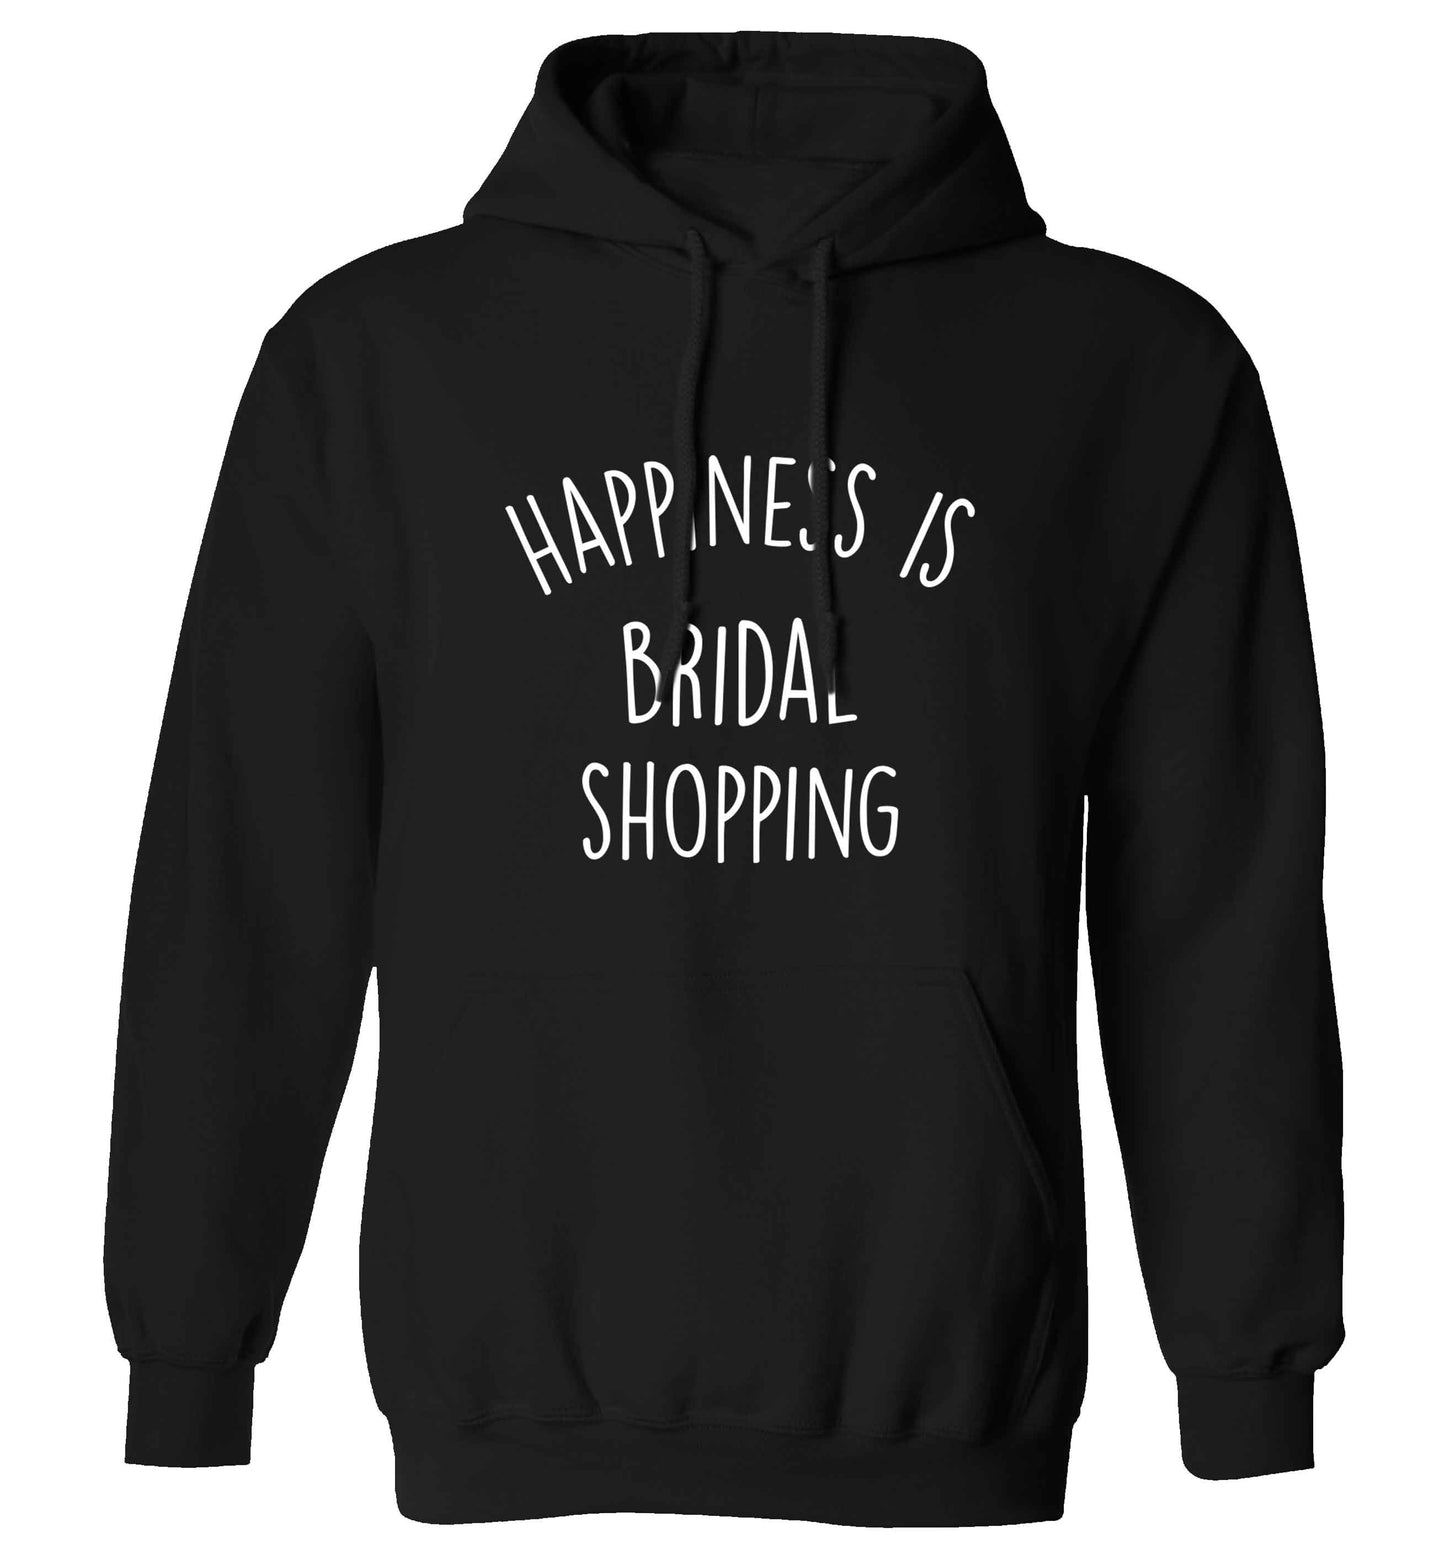 Happiness is bridal shopping adults unisex black hoodie 2XL